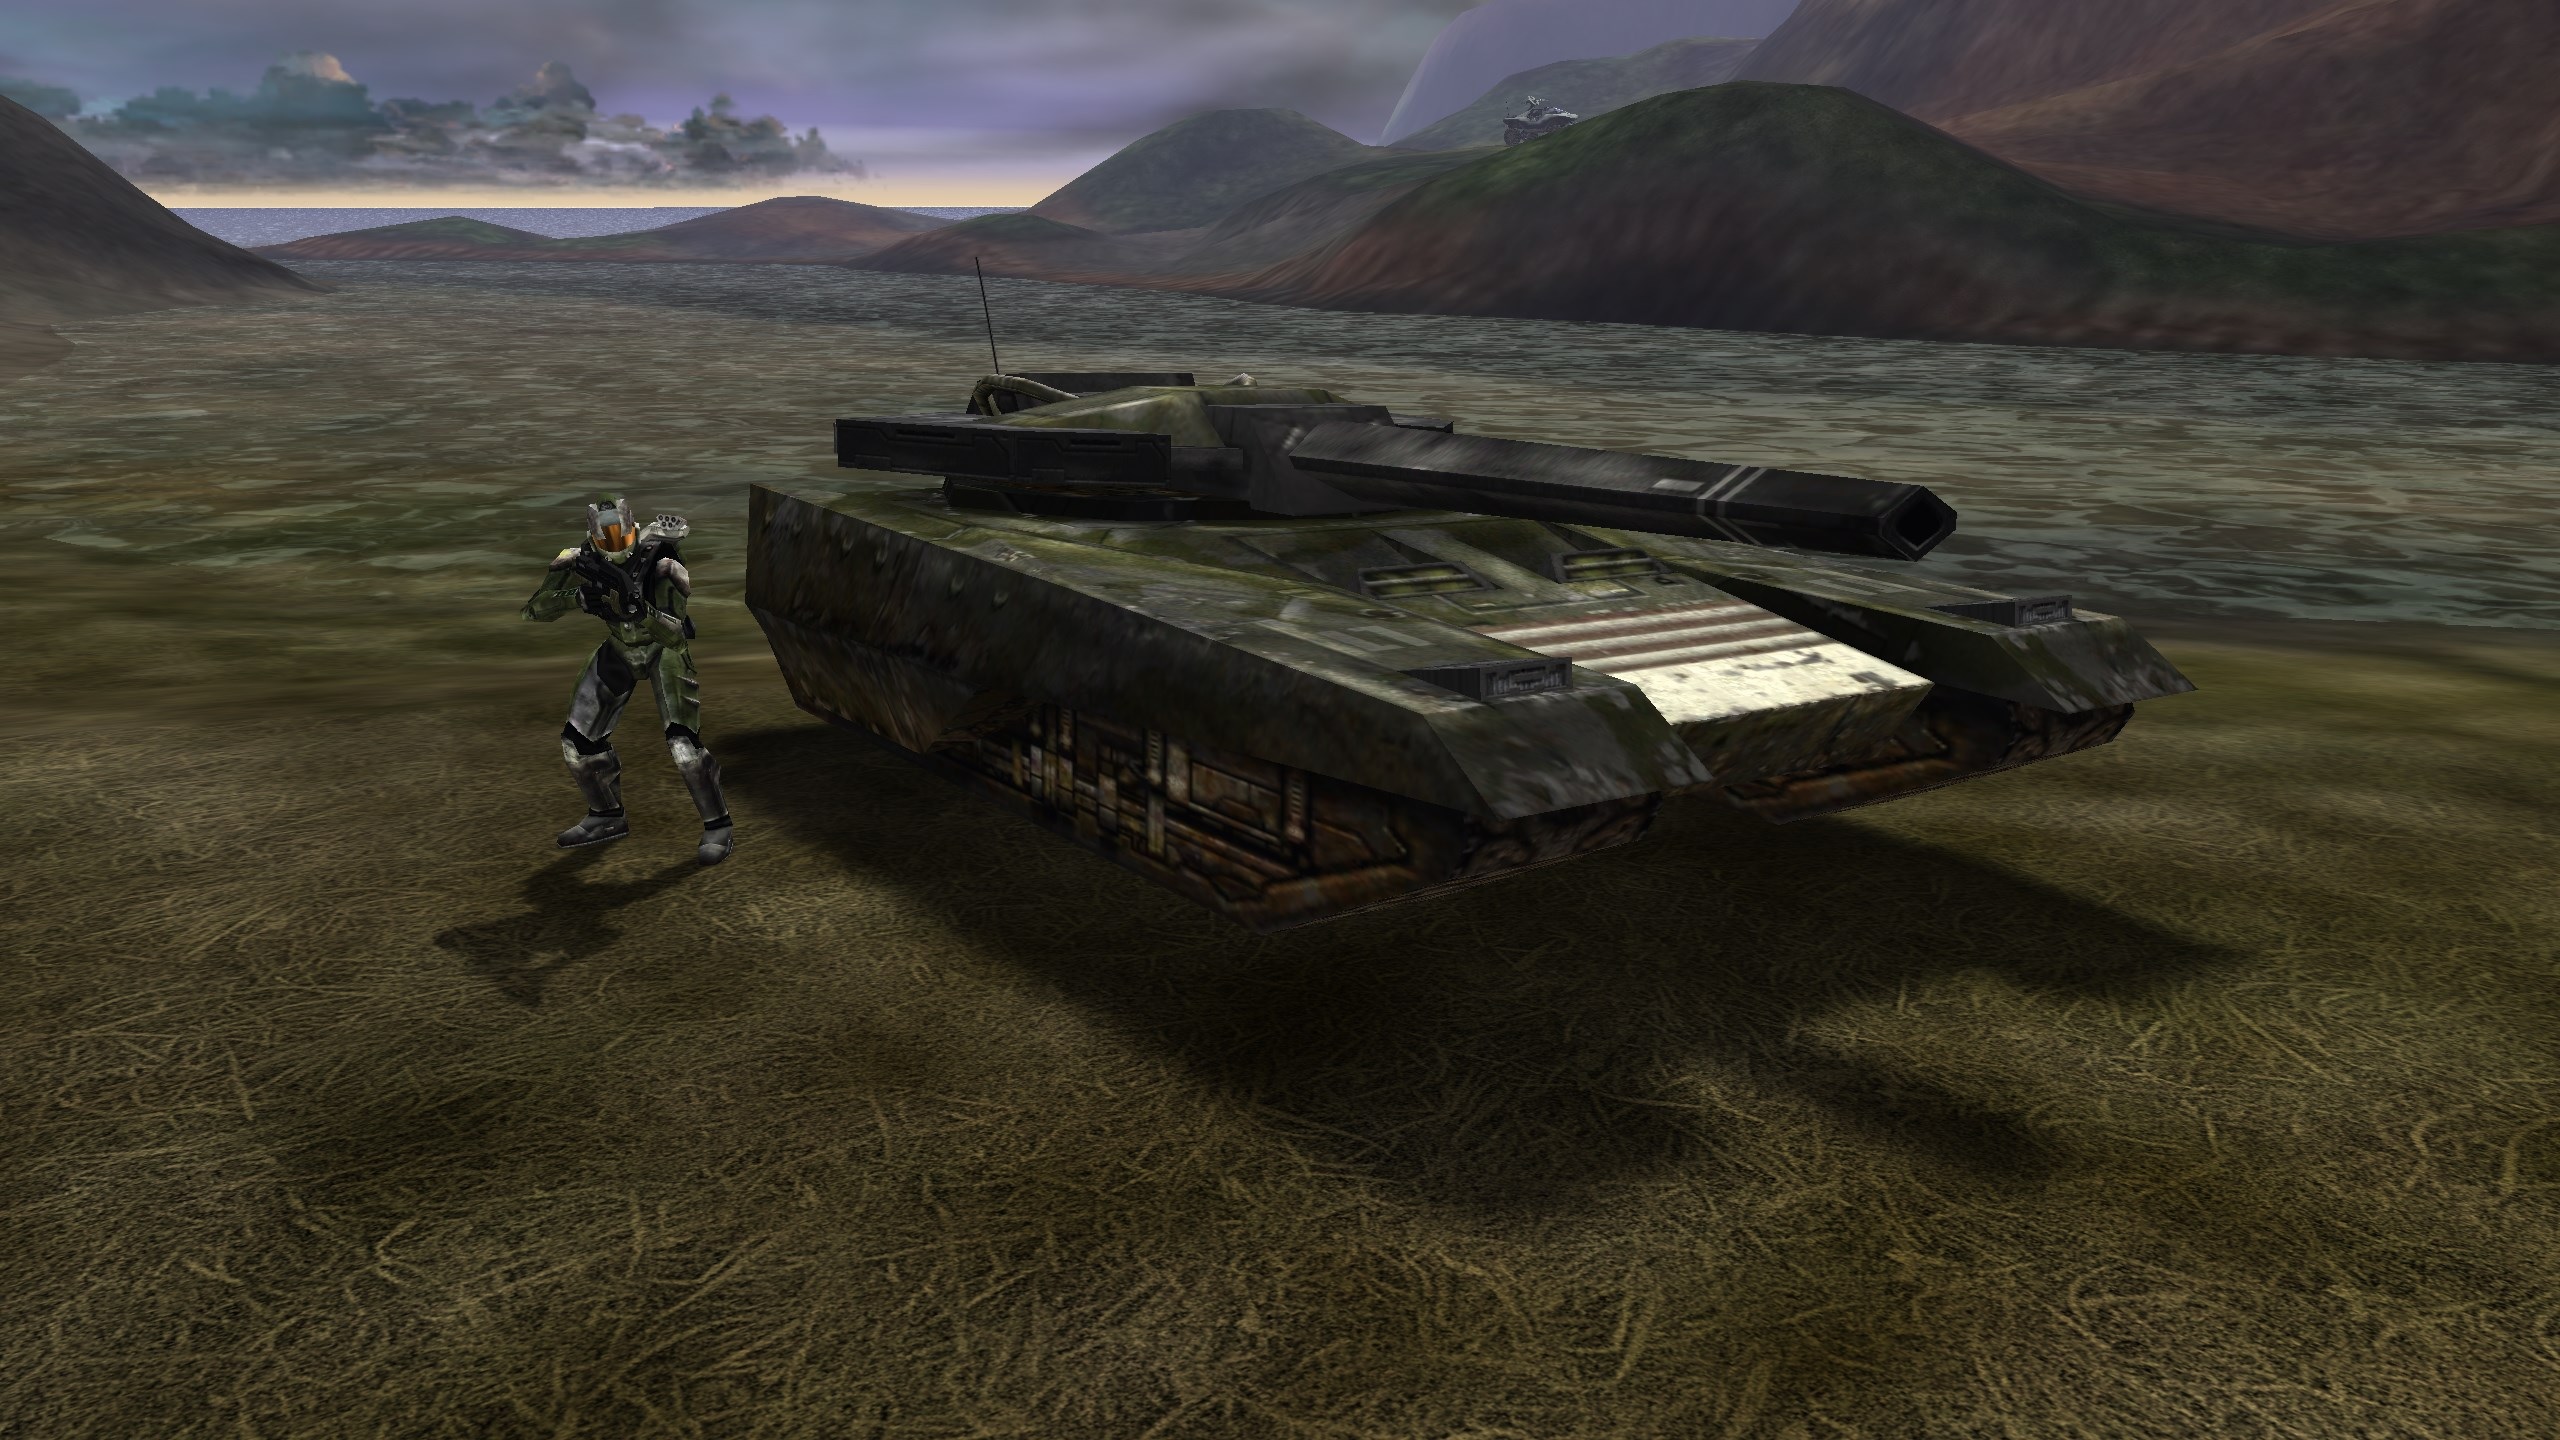 Image of 99-era cyborg standing next to a Viper stealth tank